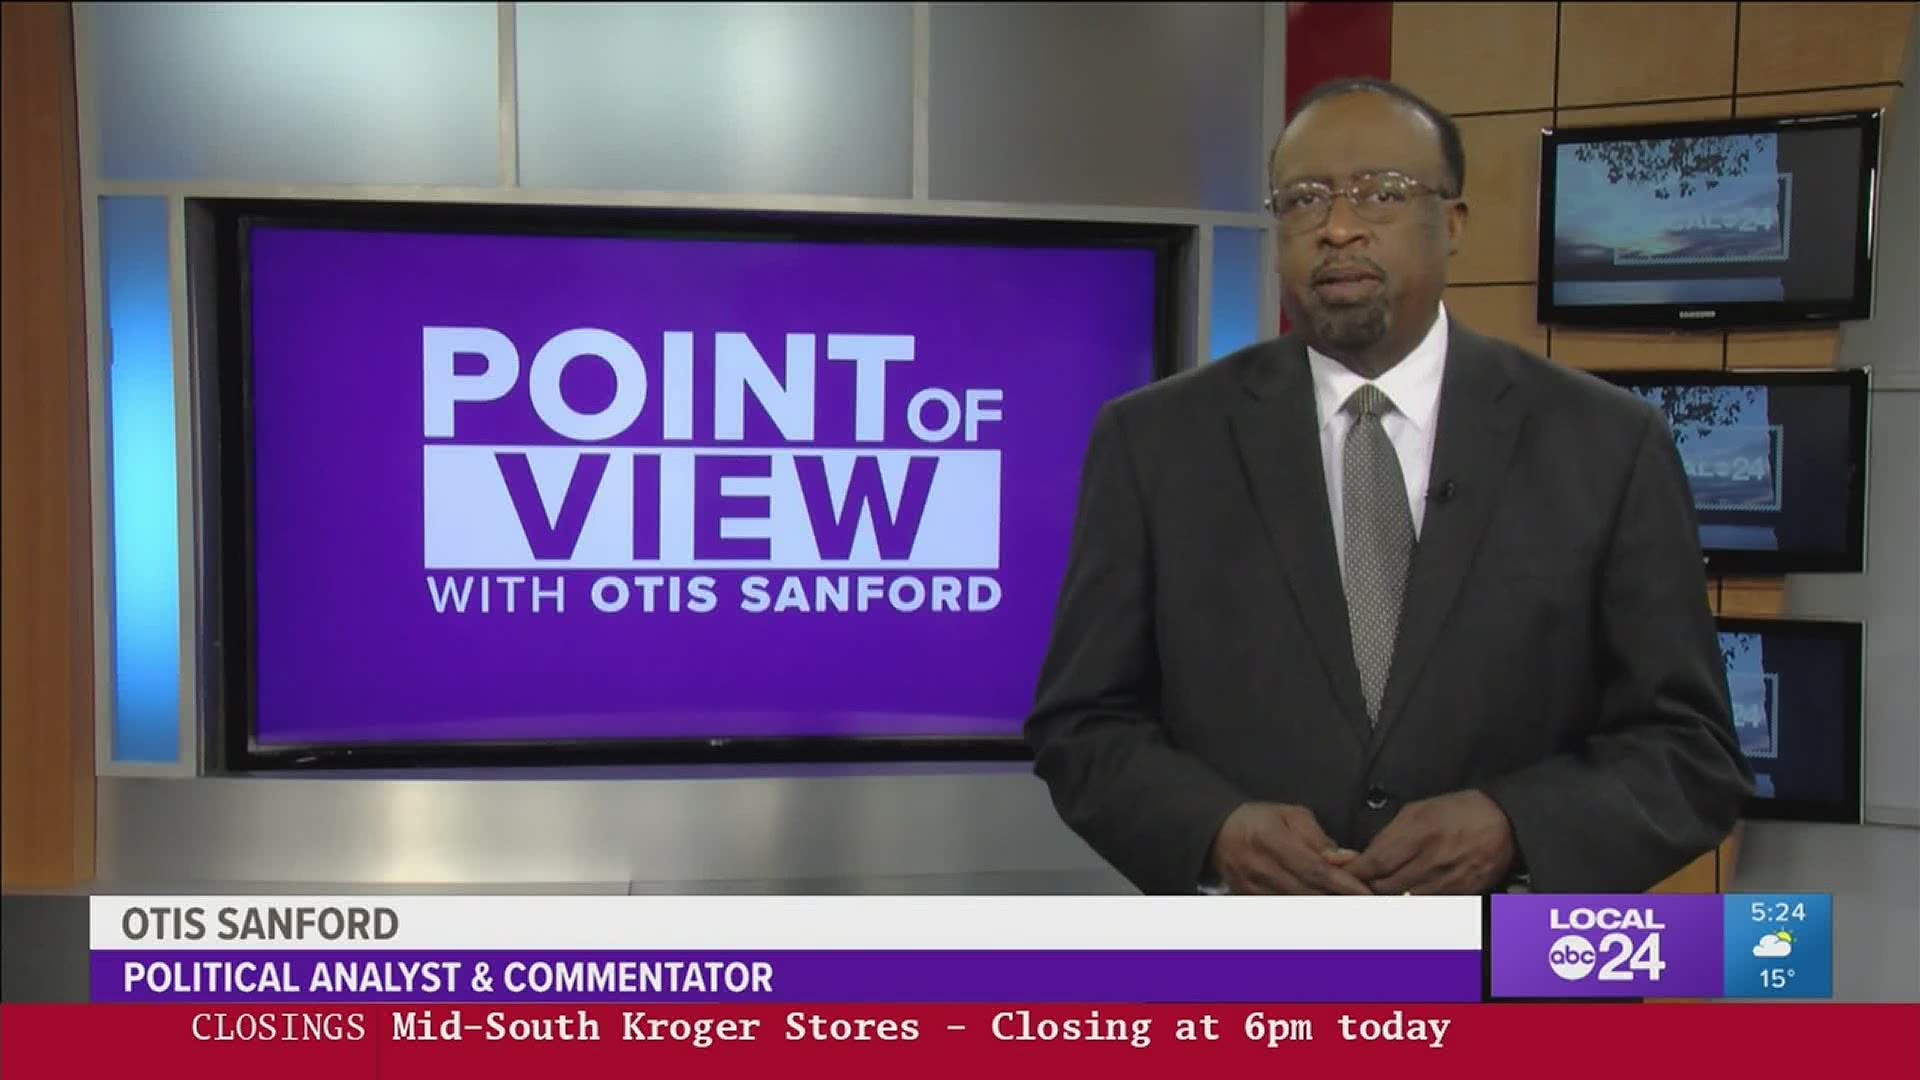 Local 24 News political analyst and commentator Otis Sanford shares his point of view on Memphis taking over the Pipkin Building vaccine site.